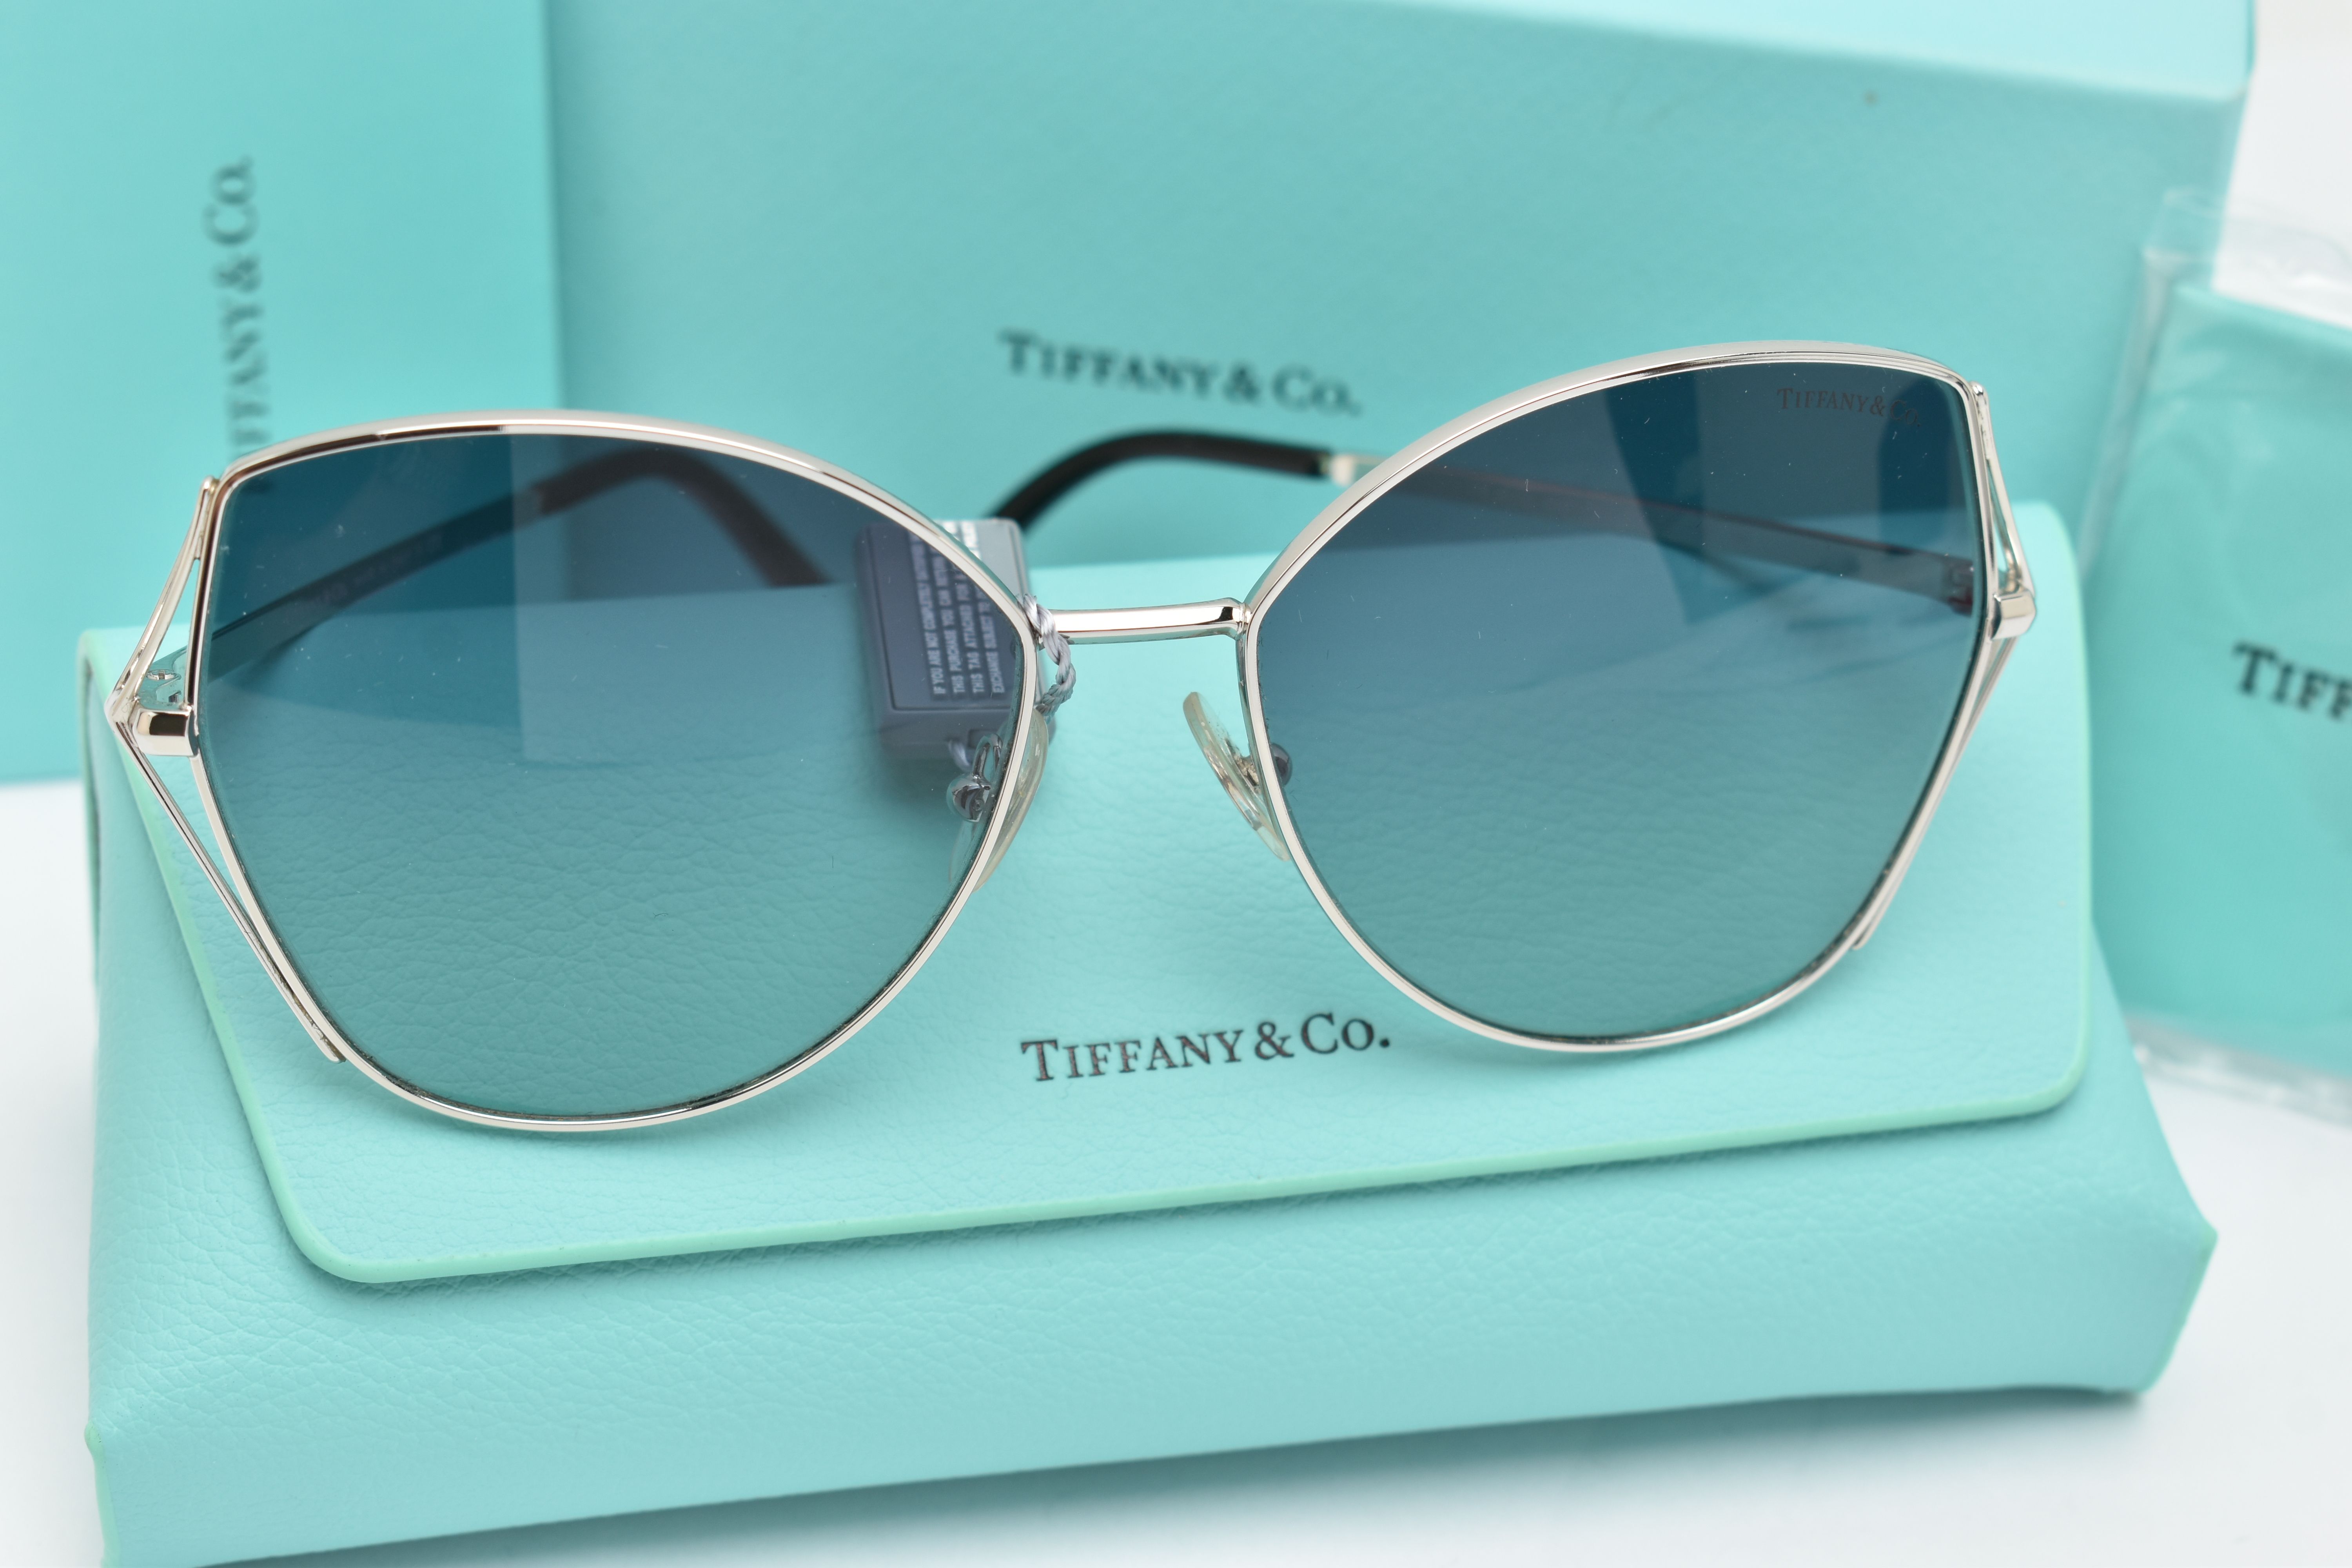 A PAIR OF 'TIFFANY & CO' SUNGLASSES, a pair of butterfly style TF3072 sunglasses, together with